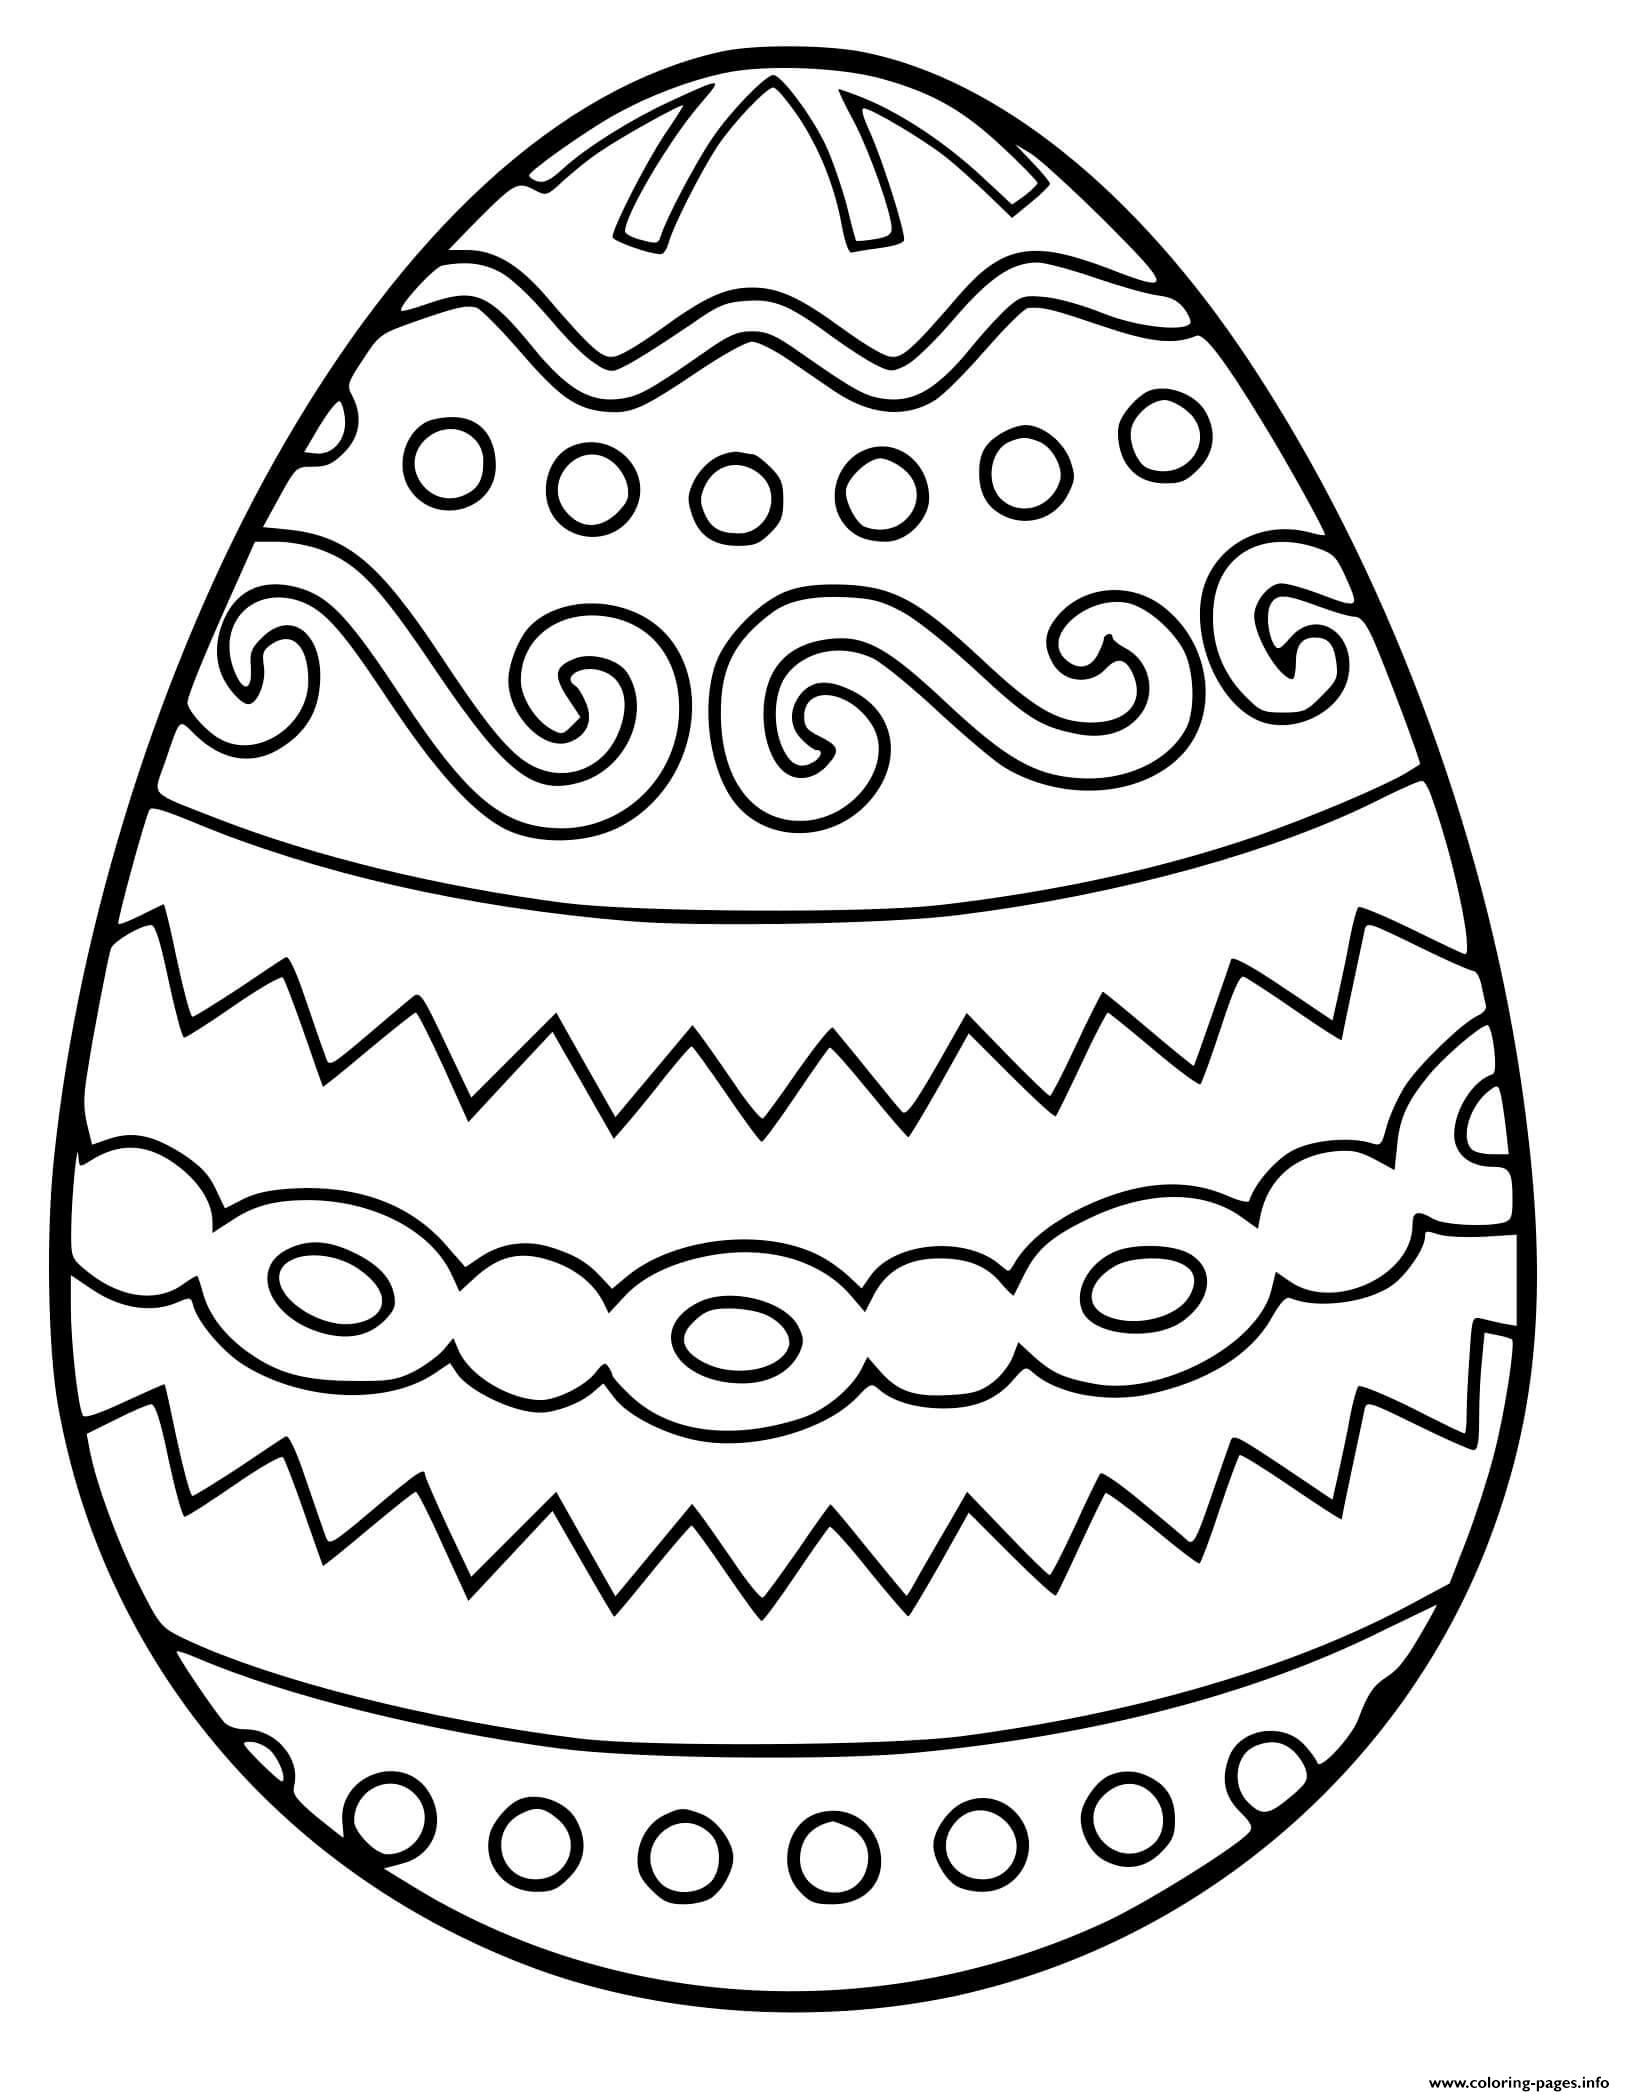 Simple Egg Easter coloring